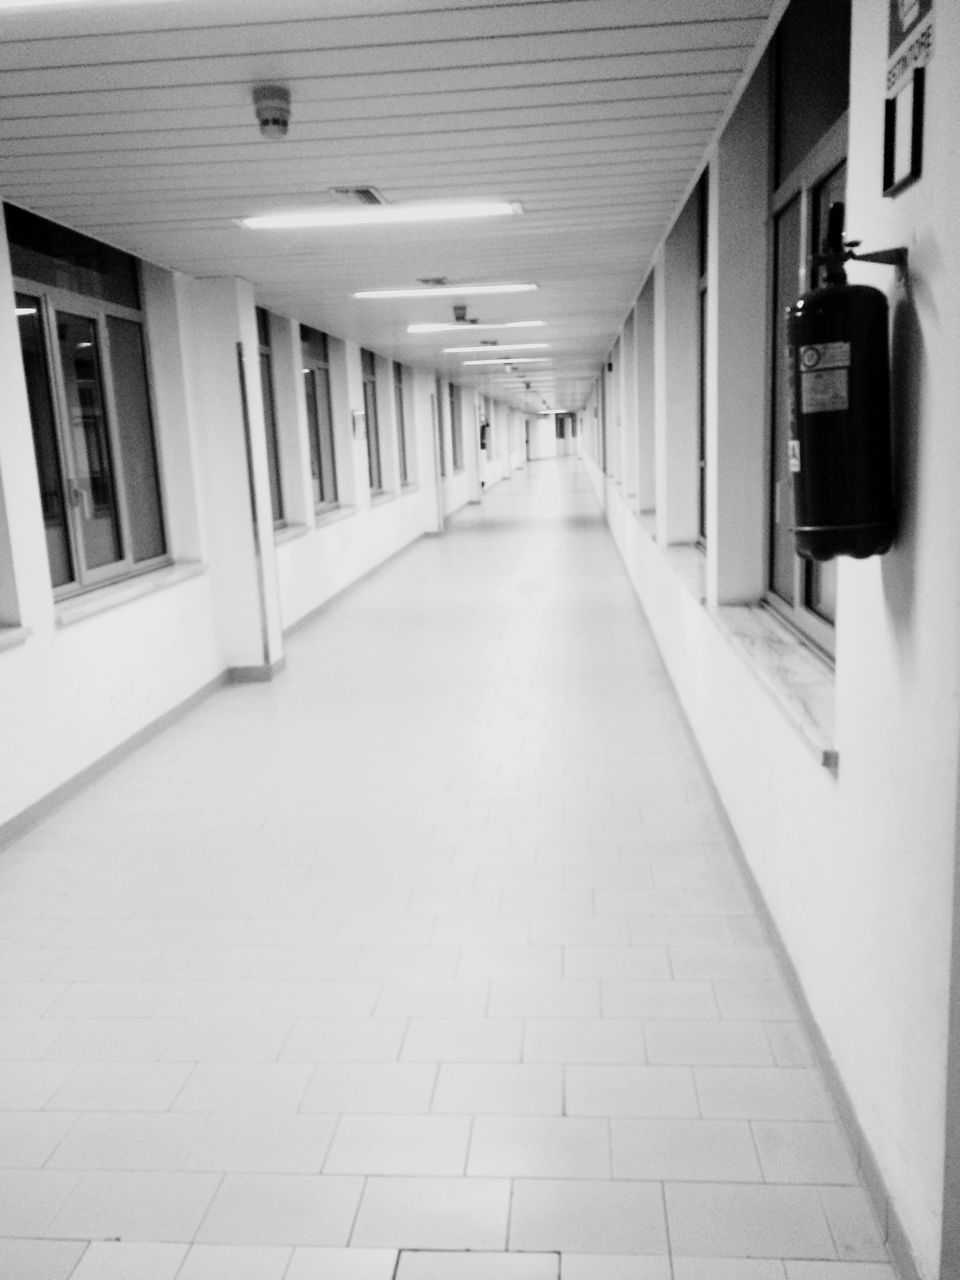 architecture, built structure, indoors, the way forward, corridor, diminishing perspective, empty, illuminated, lighting equipment, ceiling, flooring, tiled floor, building, absence, narrow, in a row, building exterior, vanishing point, no people, door